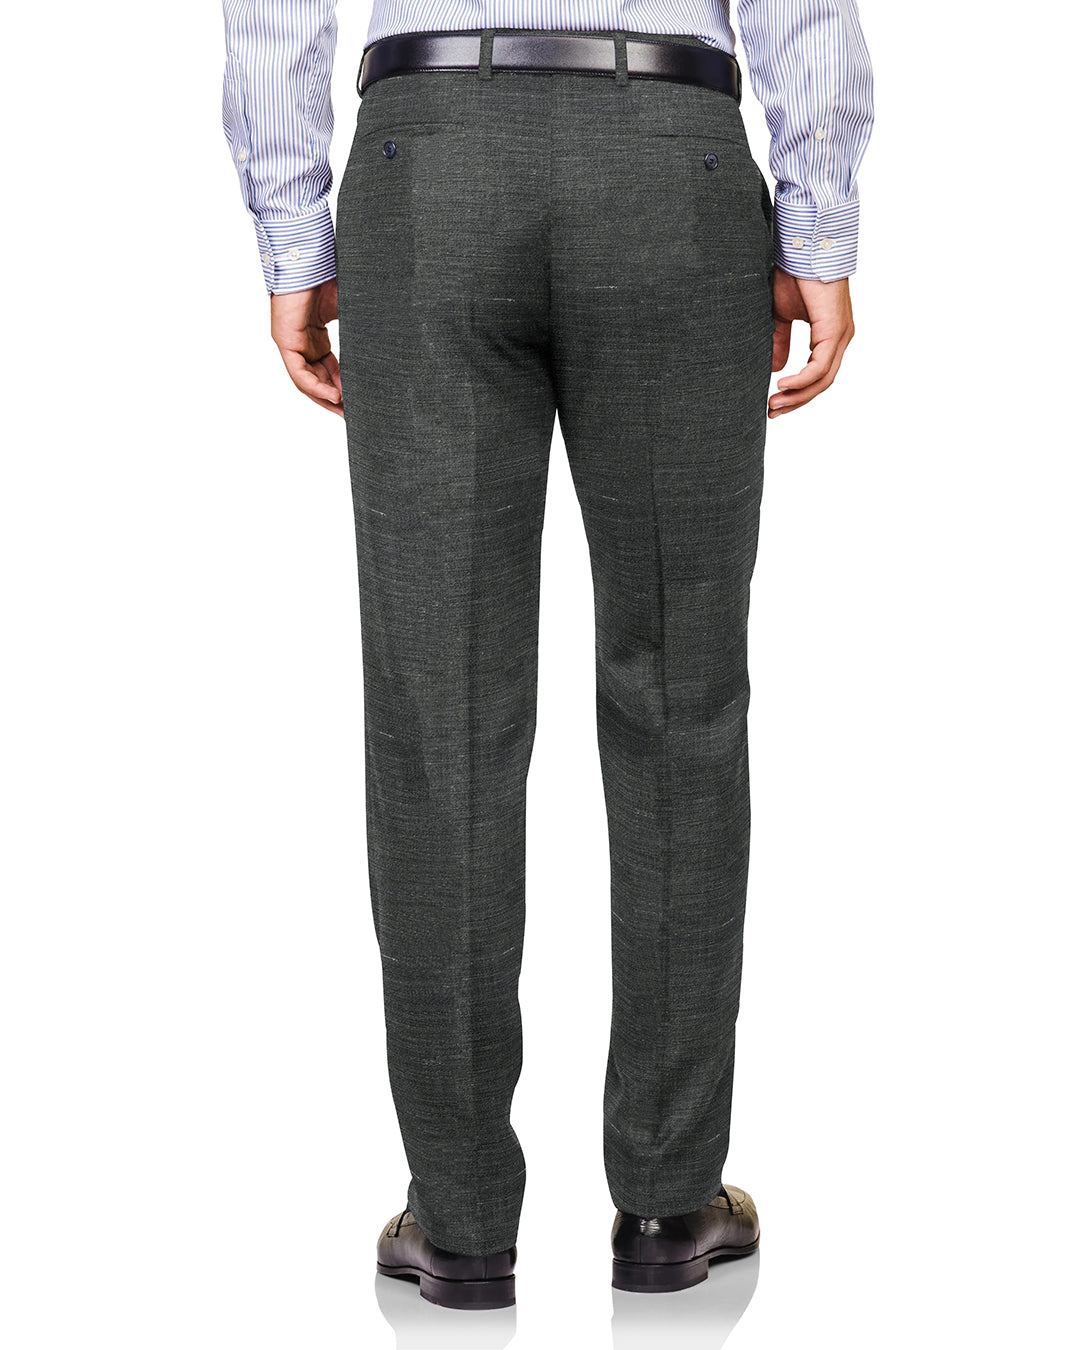 Back view of custom linen pants for men by Luxire in ash grey